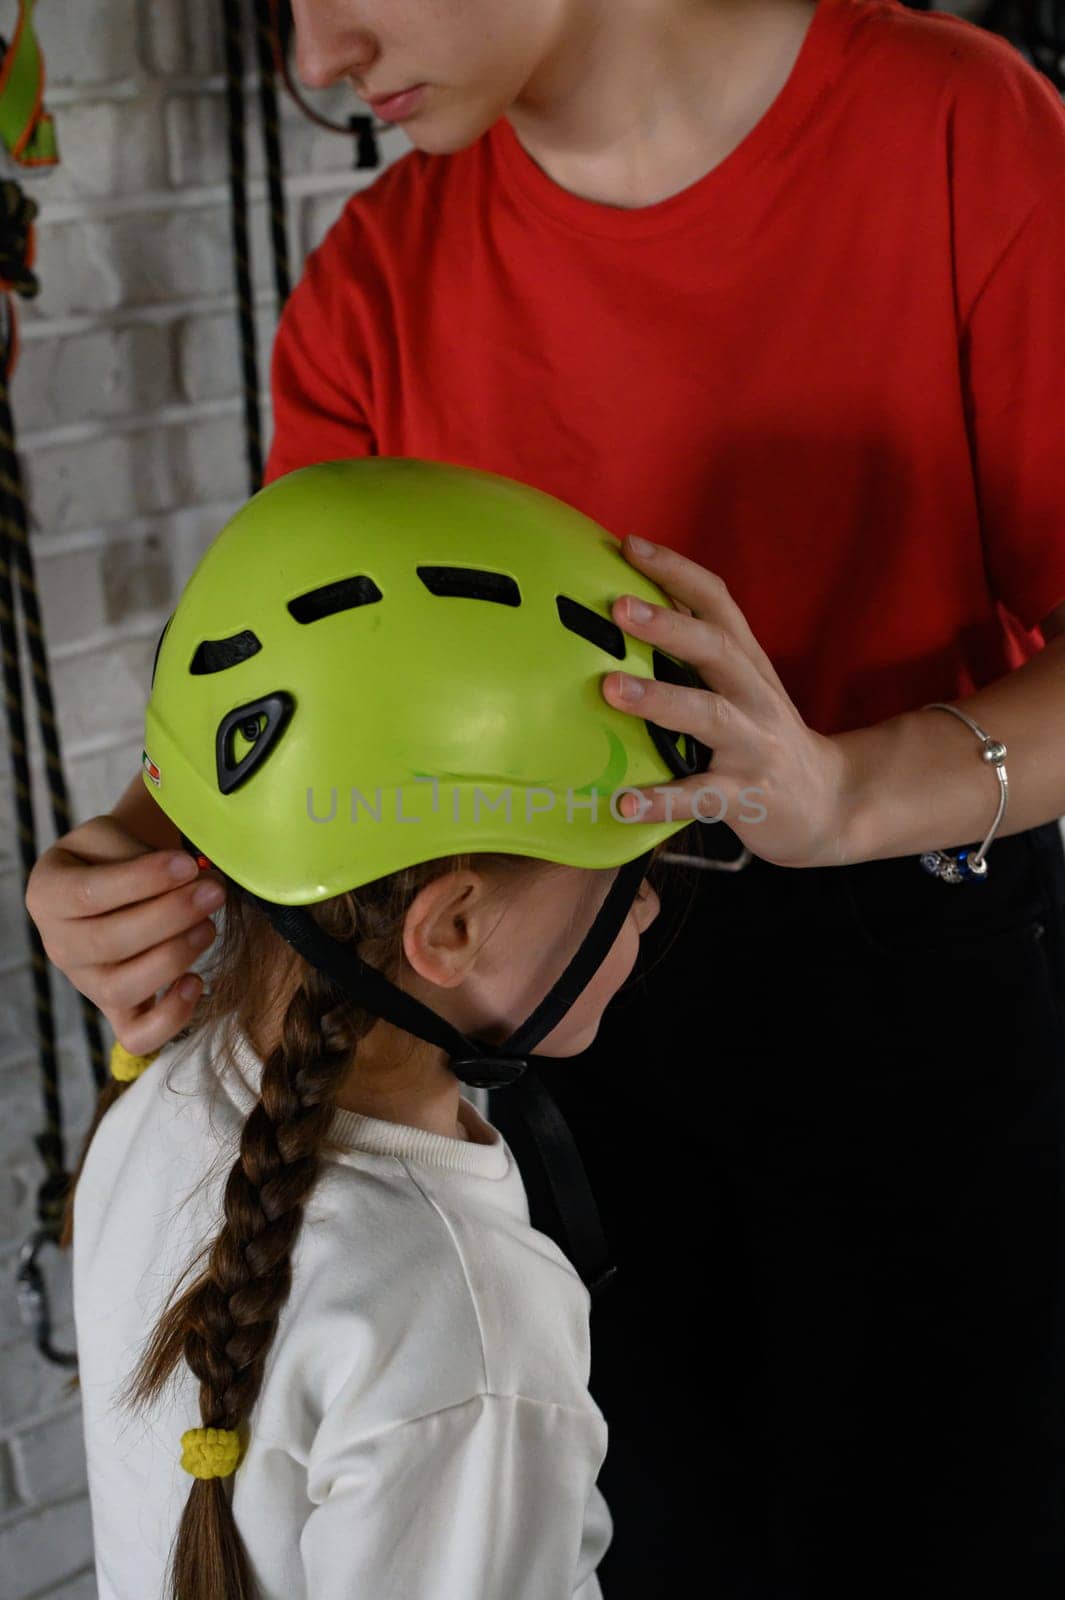 A helmet is put on the Little Girl's head as protection on a cable car. Ivano-Frankivsk, Ukraine June 7, 2023 by Niko_Cingaryuk